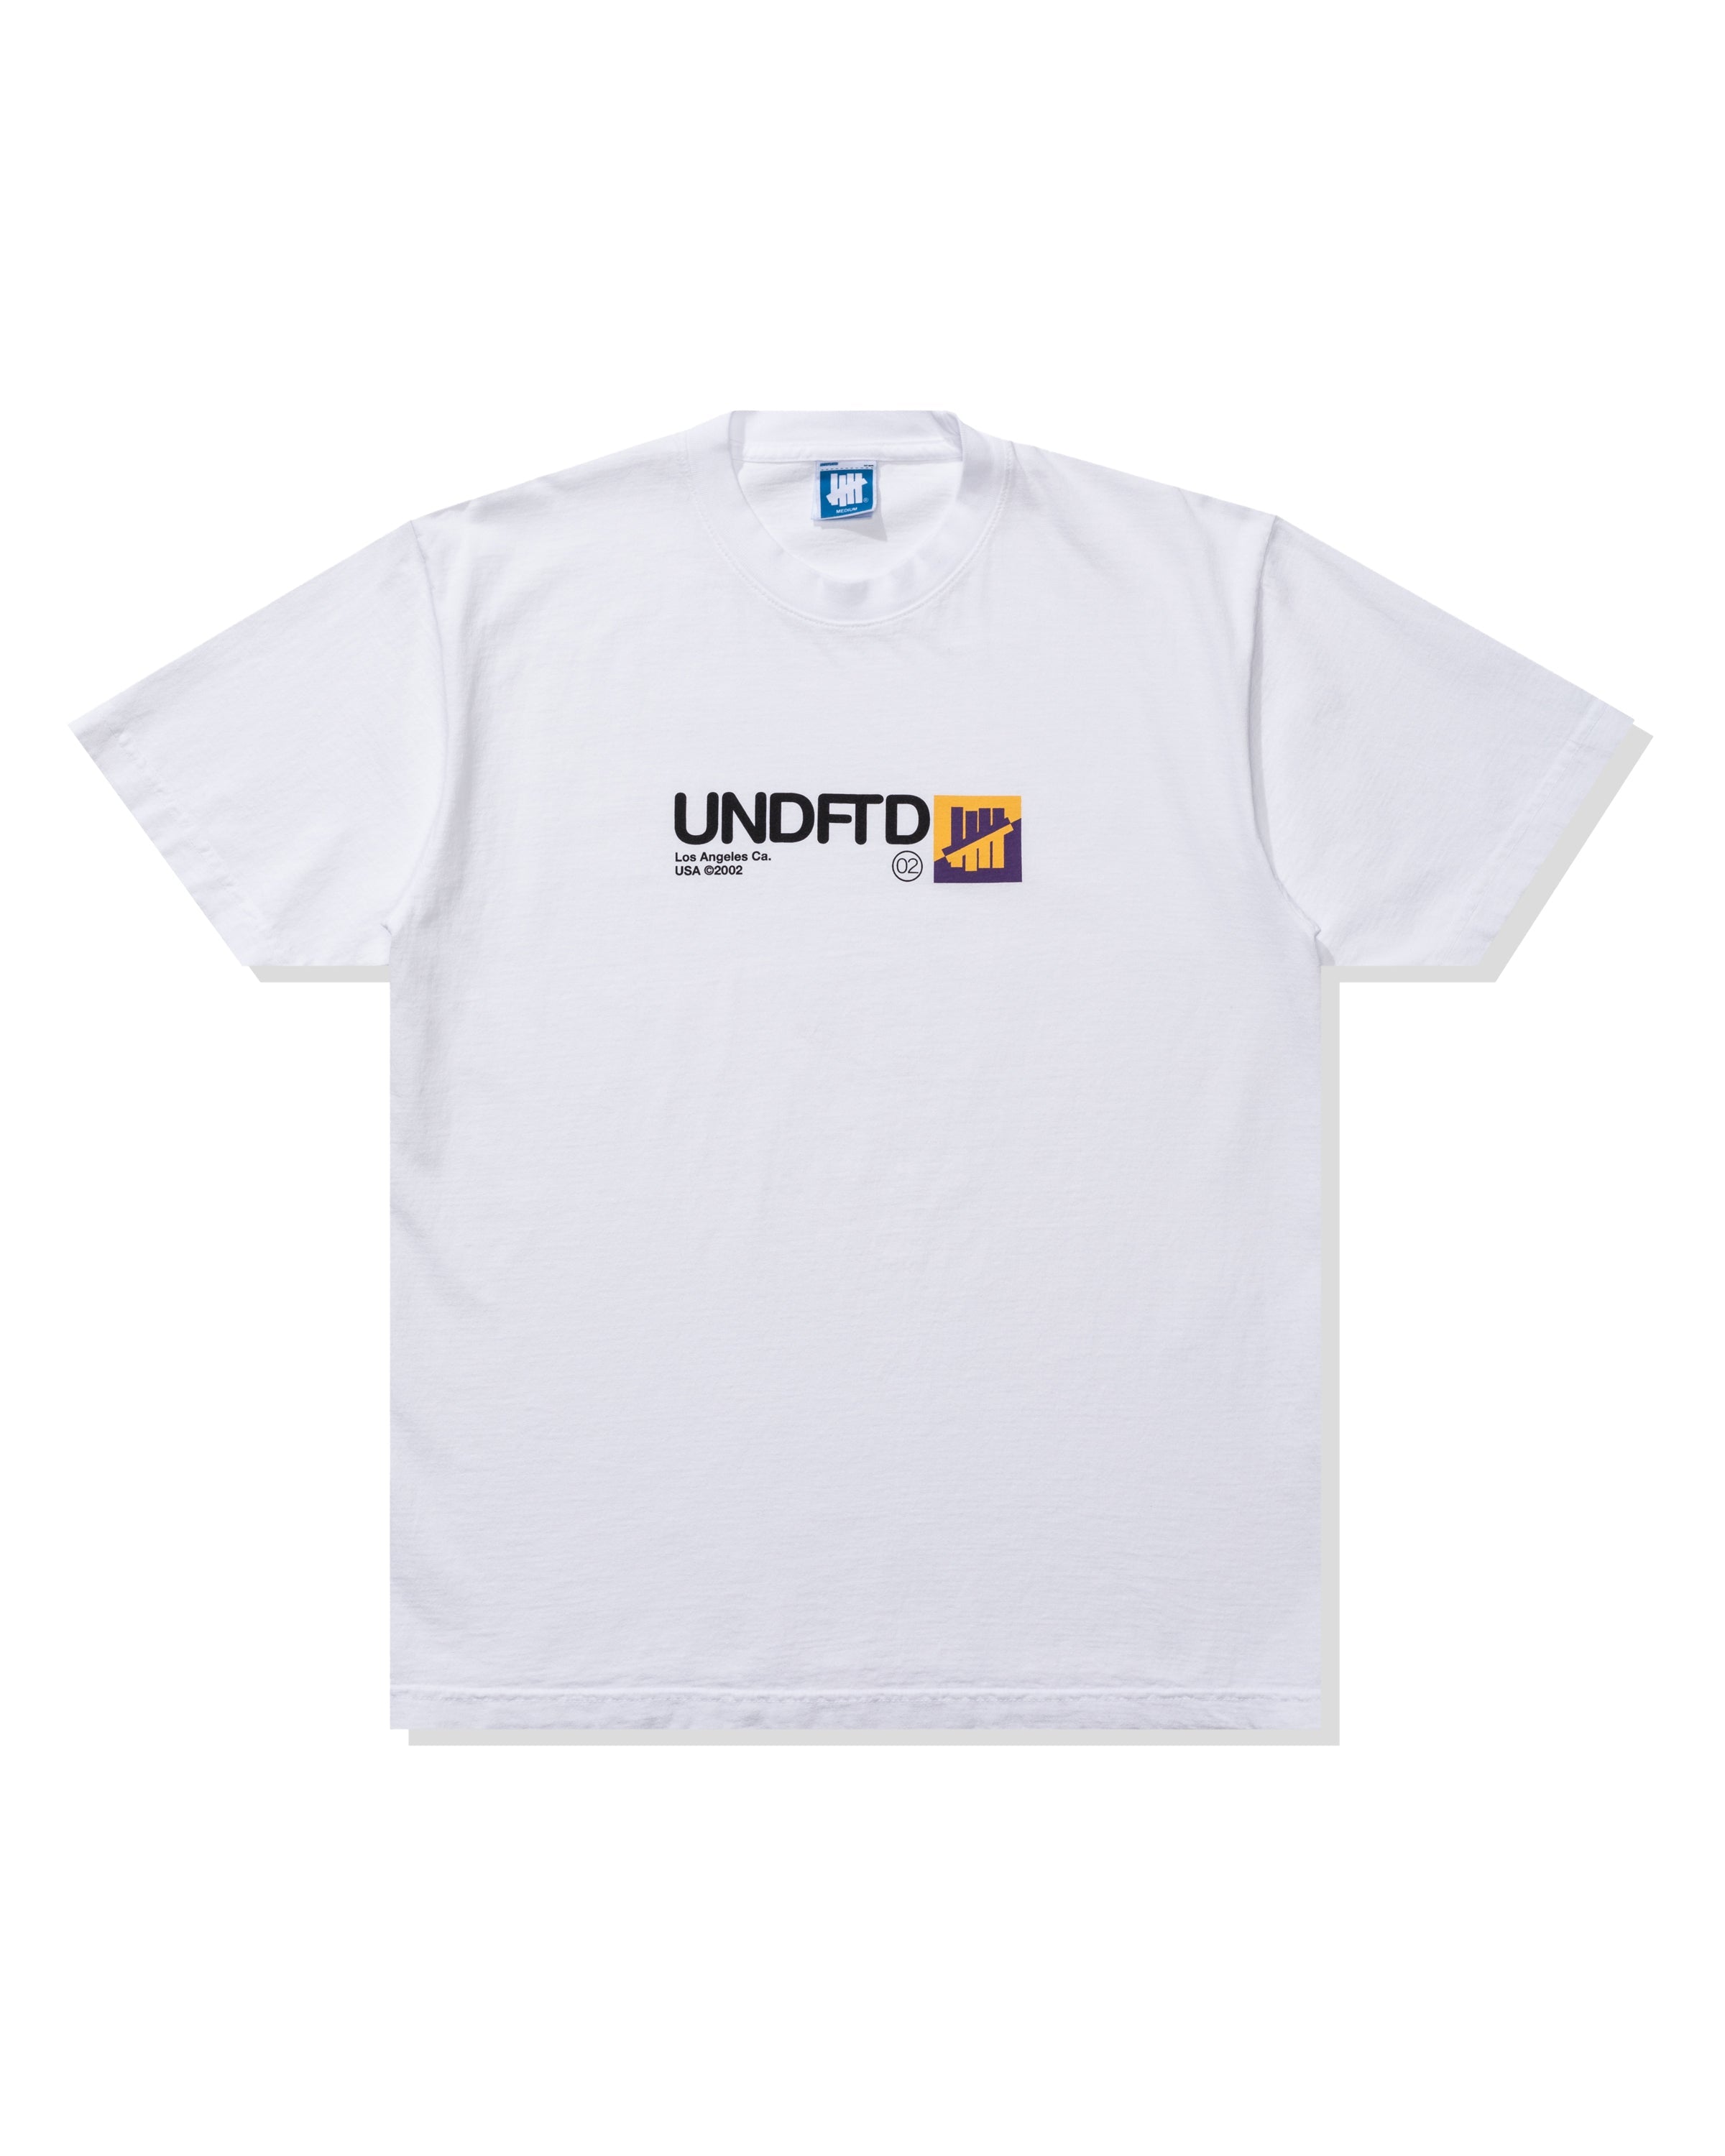 UNDEFEATED TAG S/S TEE – UNDEFEATED JAPAN